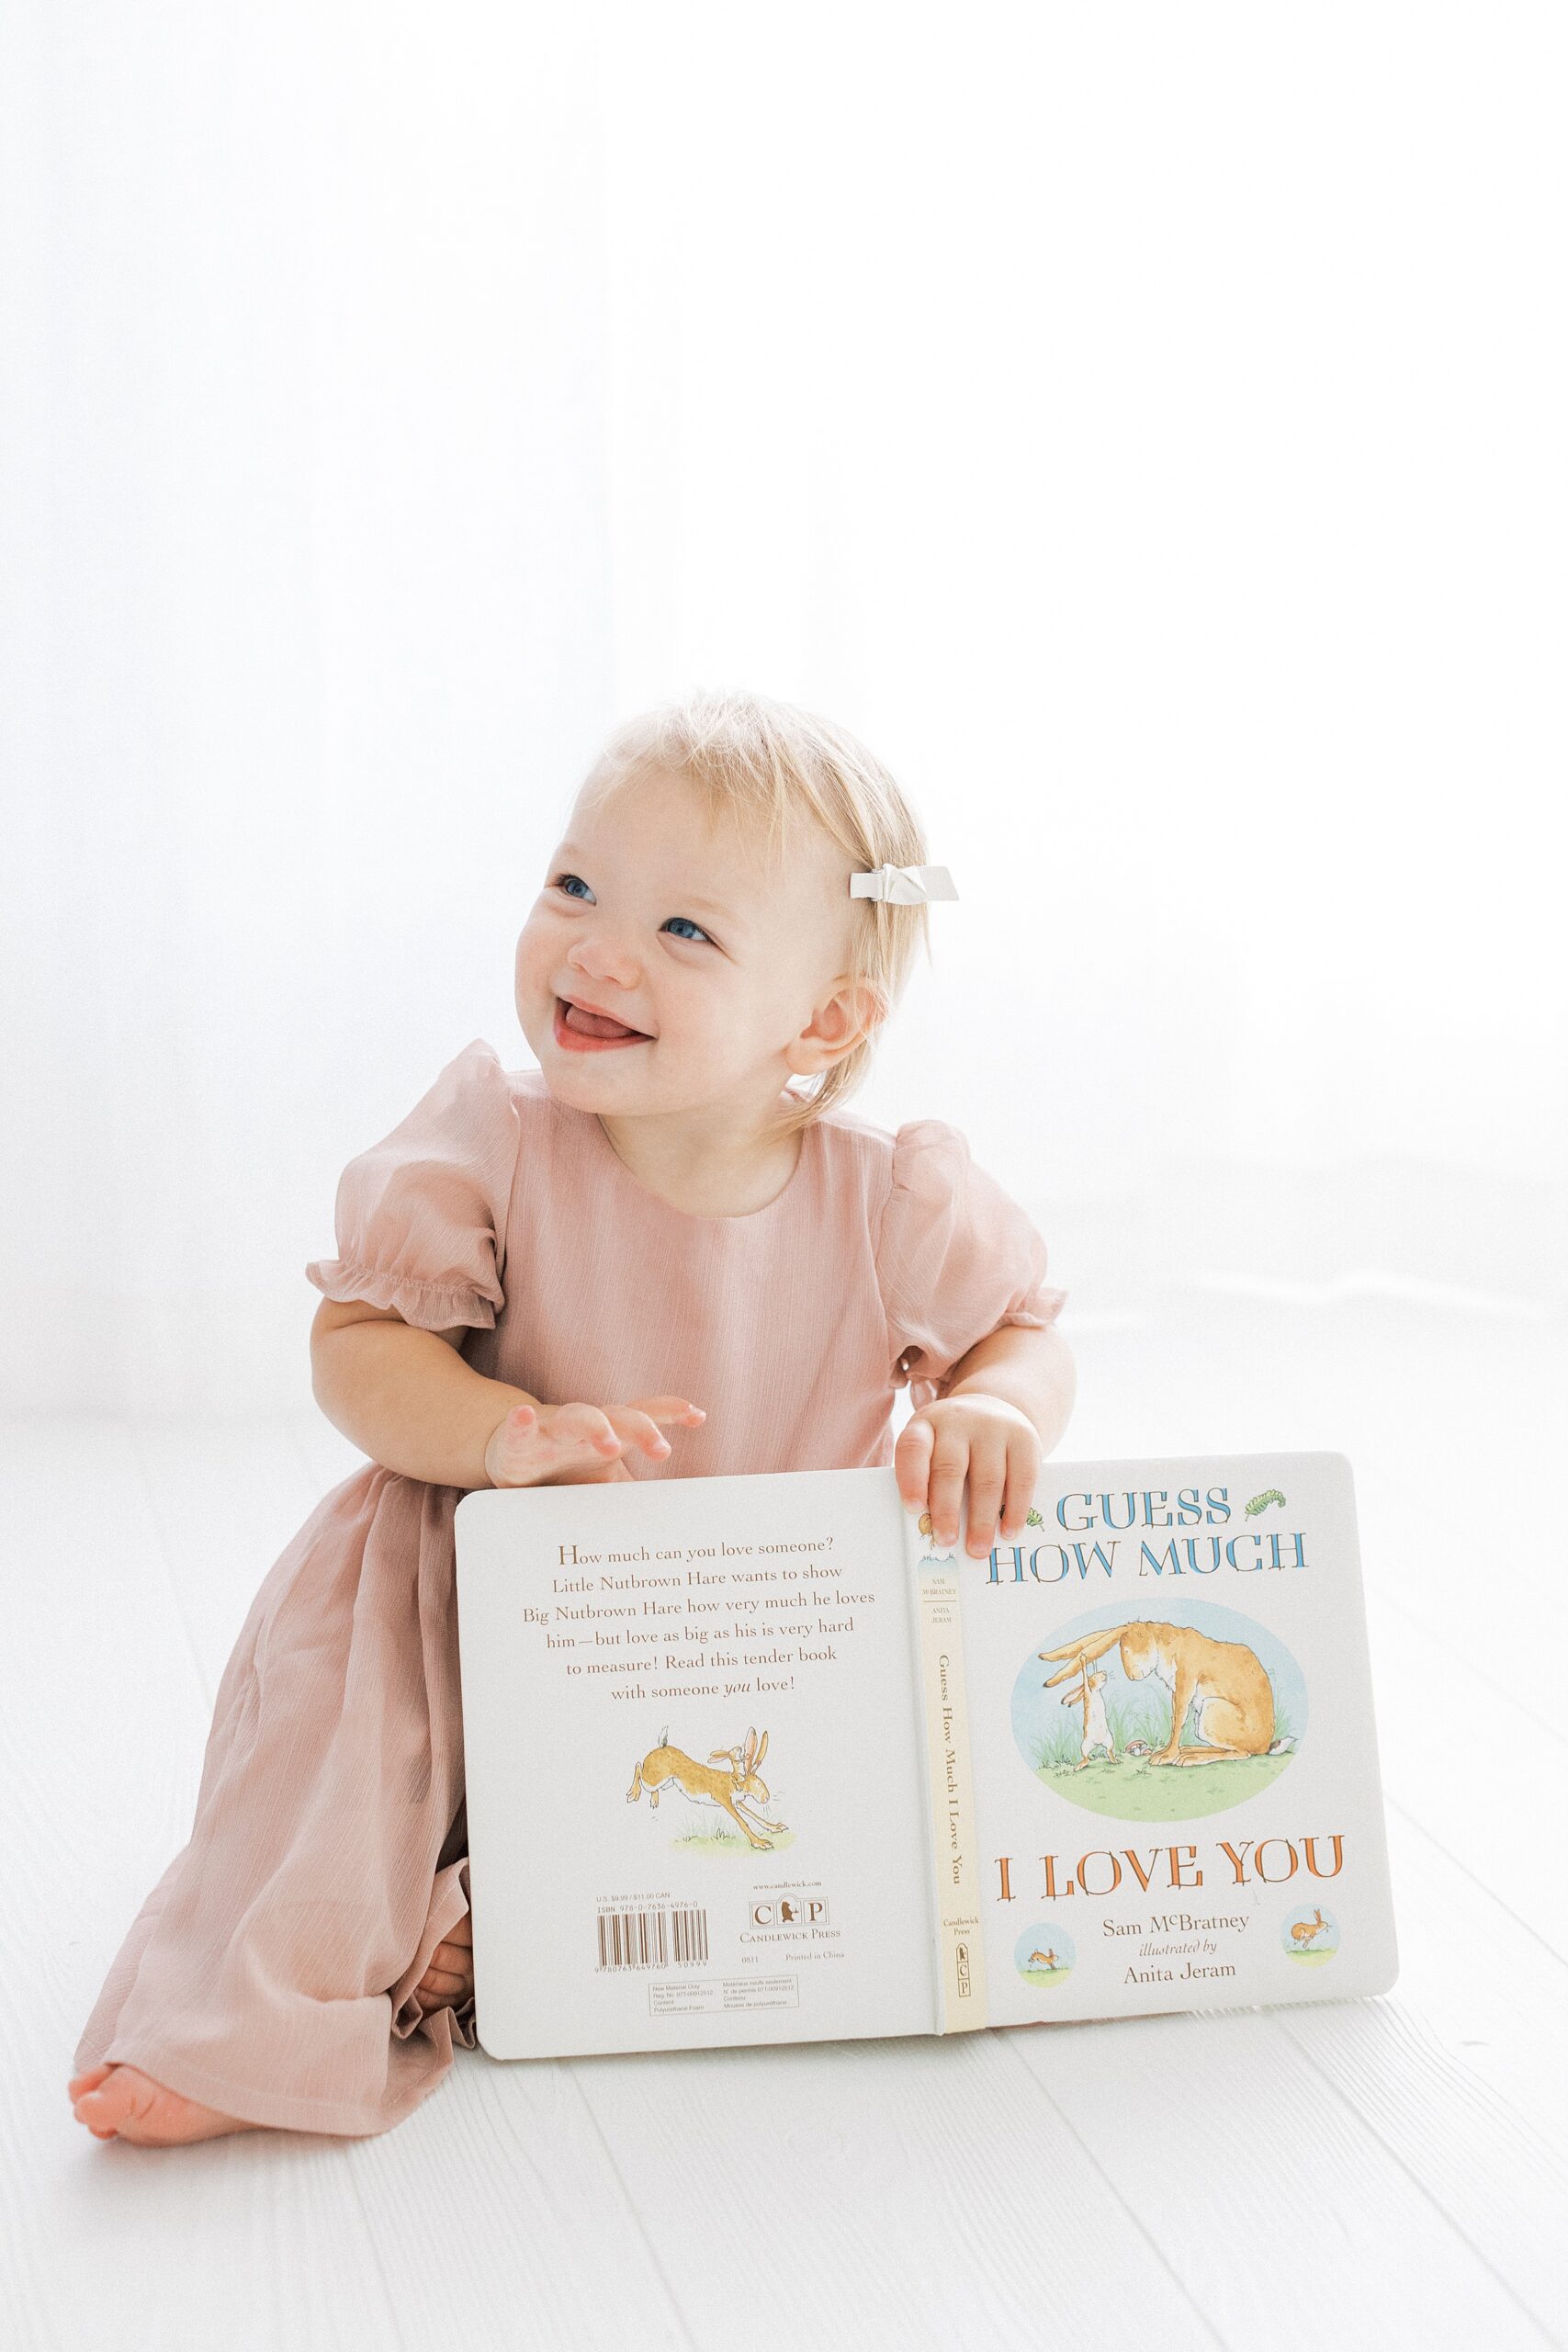 A happy young toddler girl in a pink dress sits on the floor of a studio holding a book from Cultivated Kids